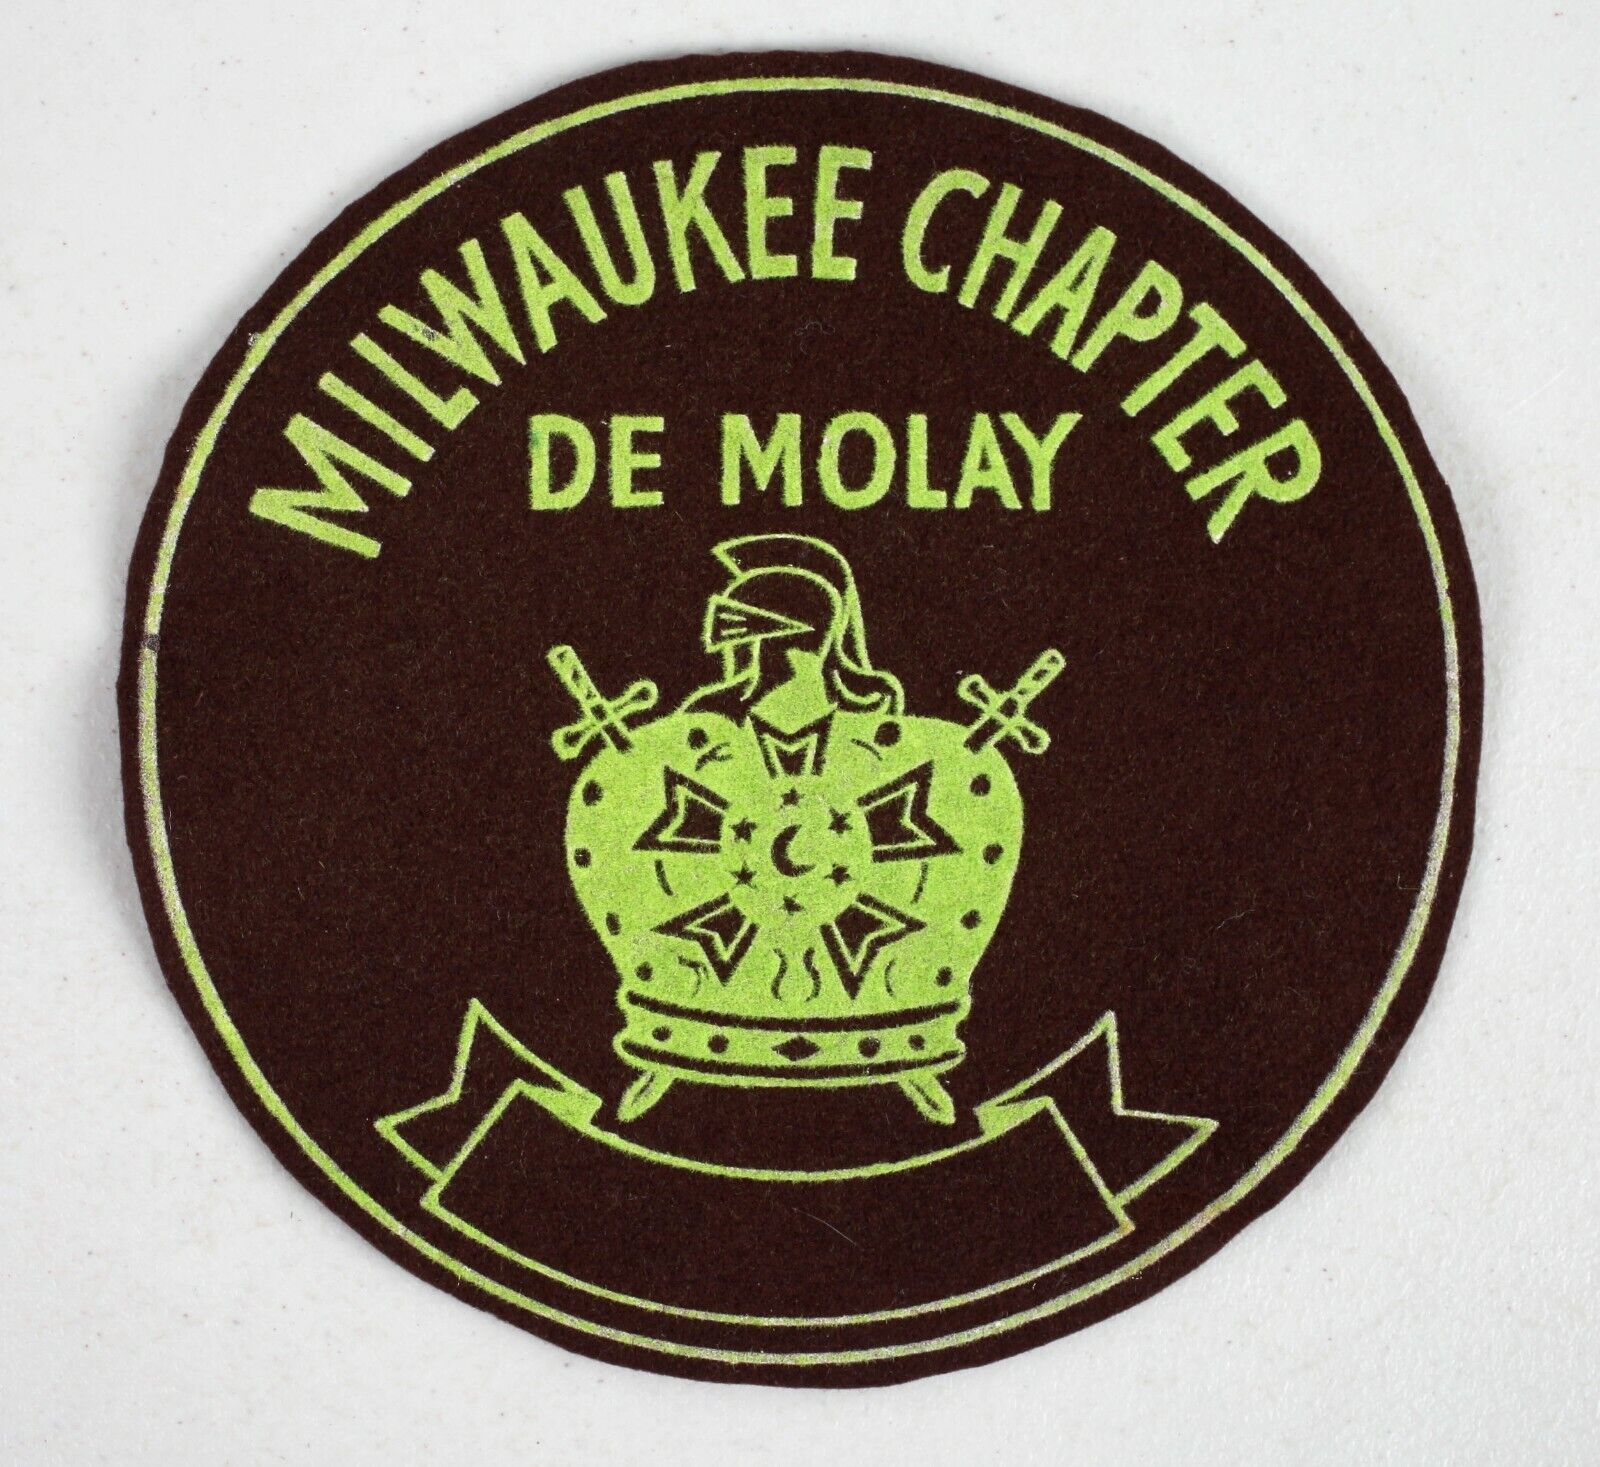 Vintage Advertising Cloth Patch Milwaukee De Molay Chapter Masons